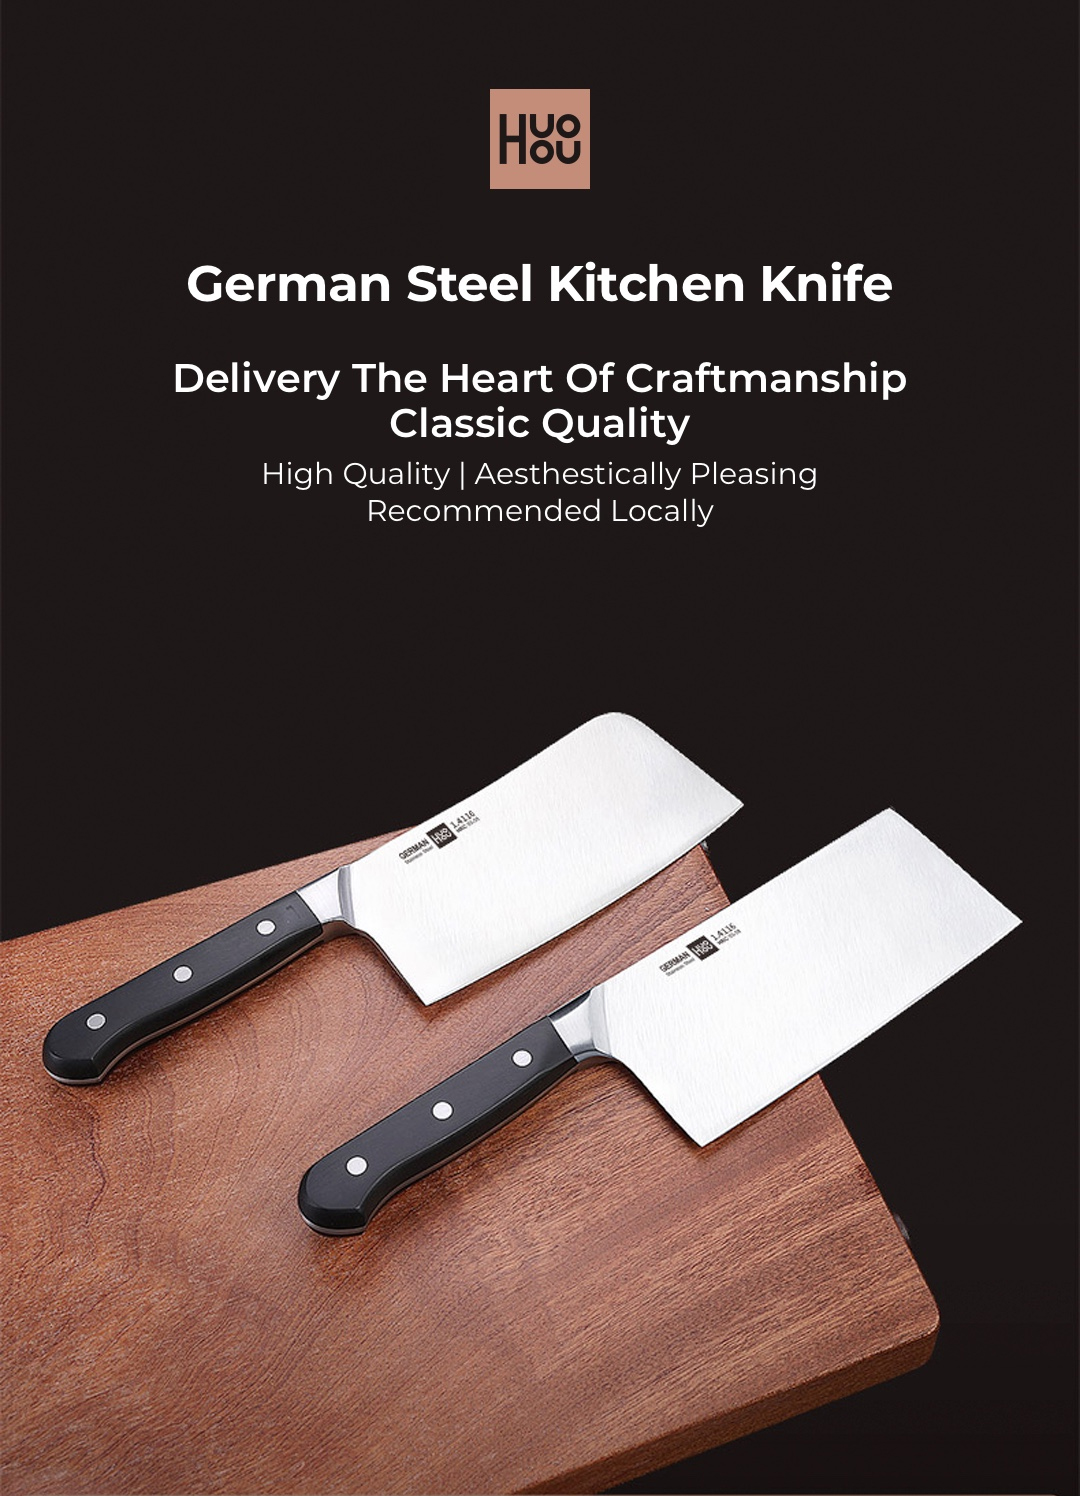 German Steel Kitchen Knife Delivery The Heart Of Craftmanship Classic Quality High Quality I Aesthestically Pleasing Recommended Locally